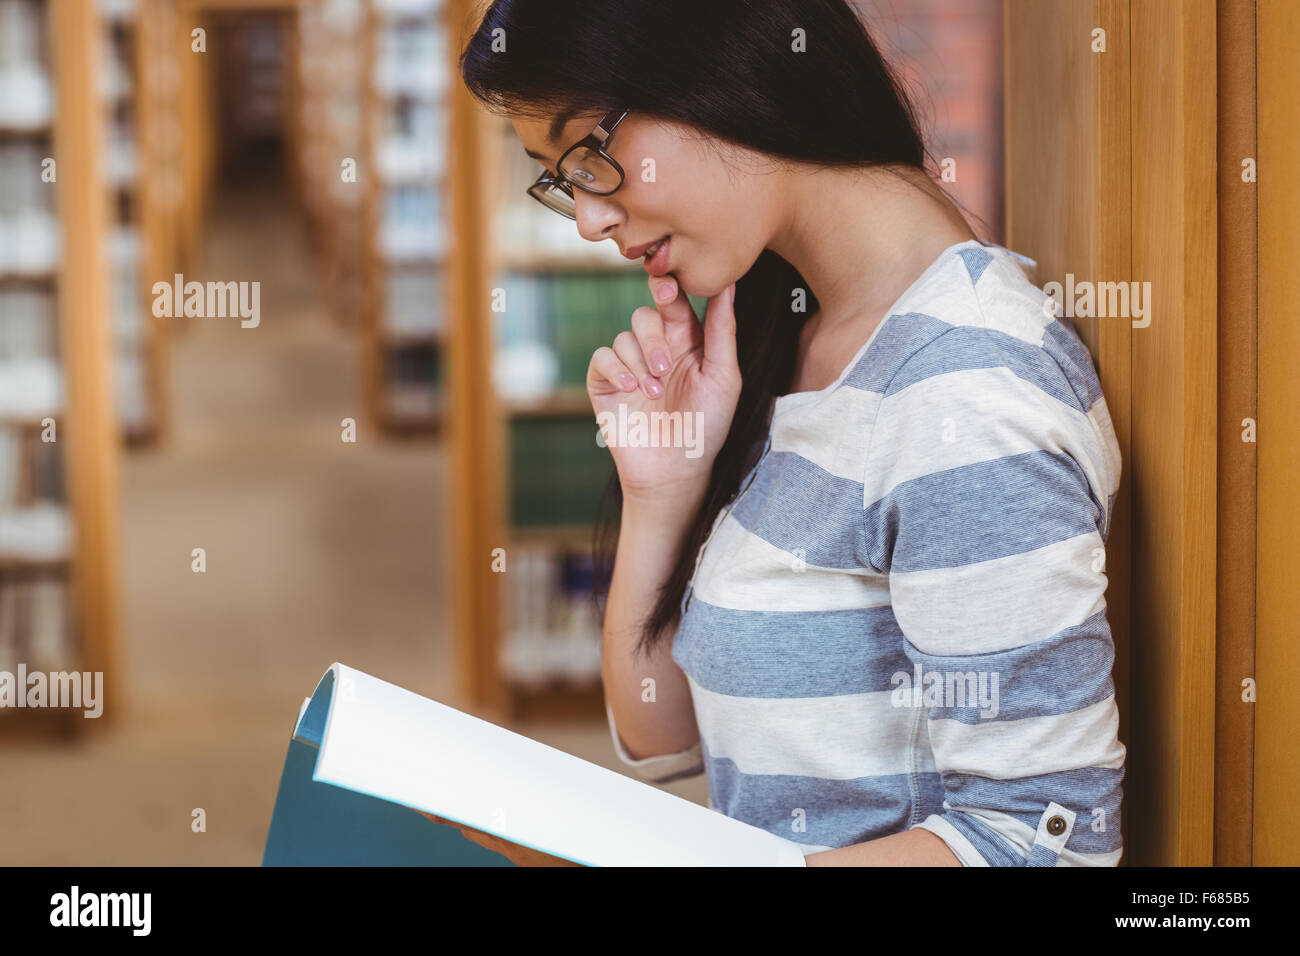 Focused student leaning against bookshelves and reading a book in library Stock Photo